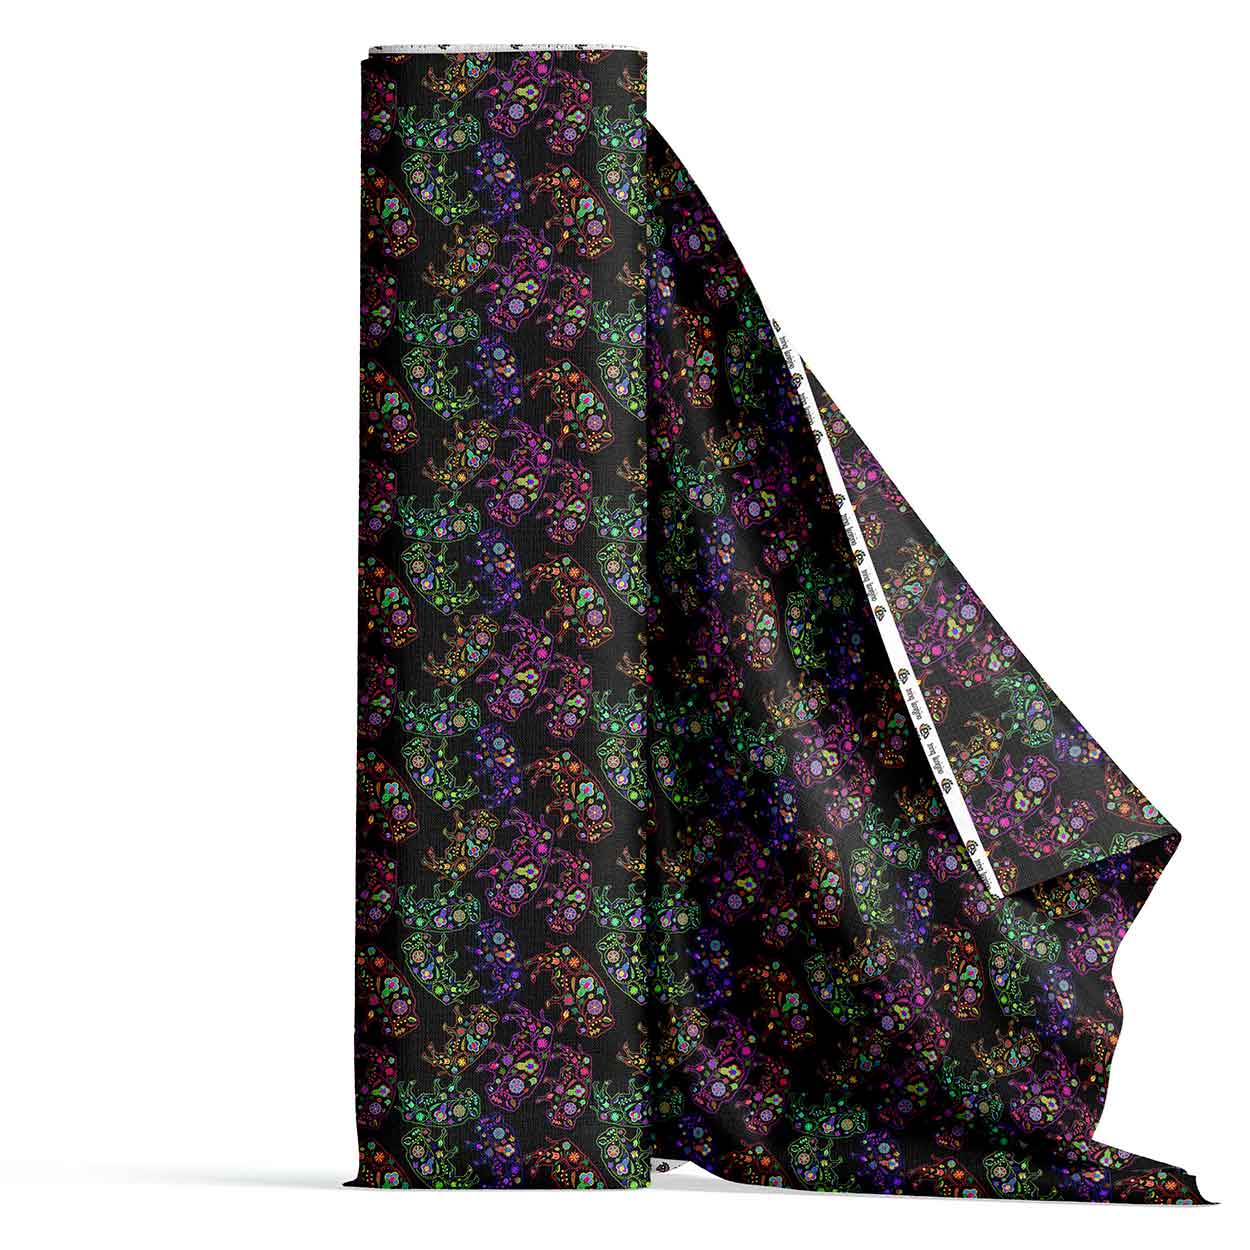 Neon Floral Buffalos Satin Fabric By the Yard Pre Order